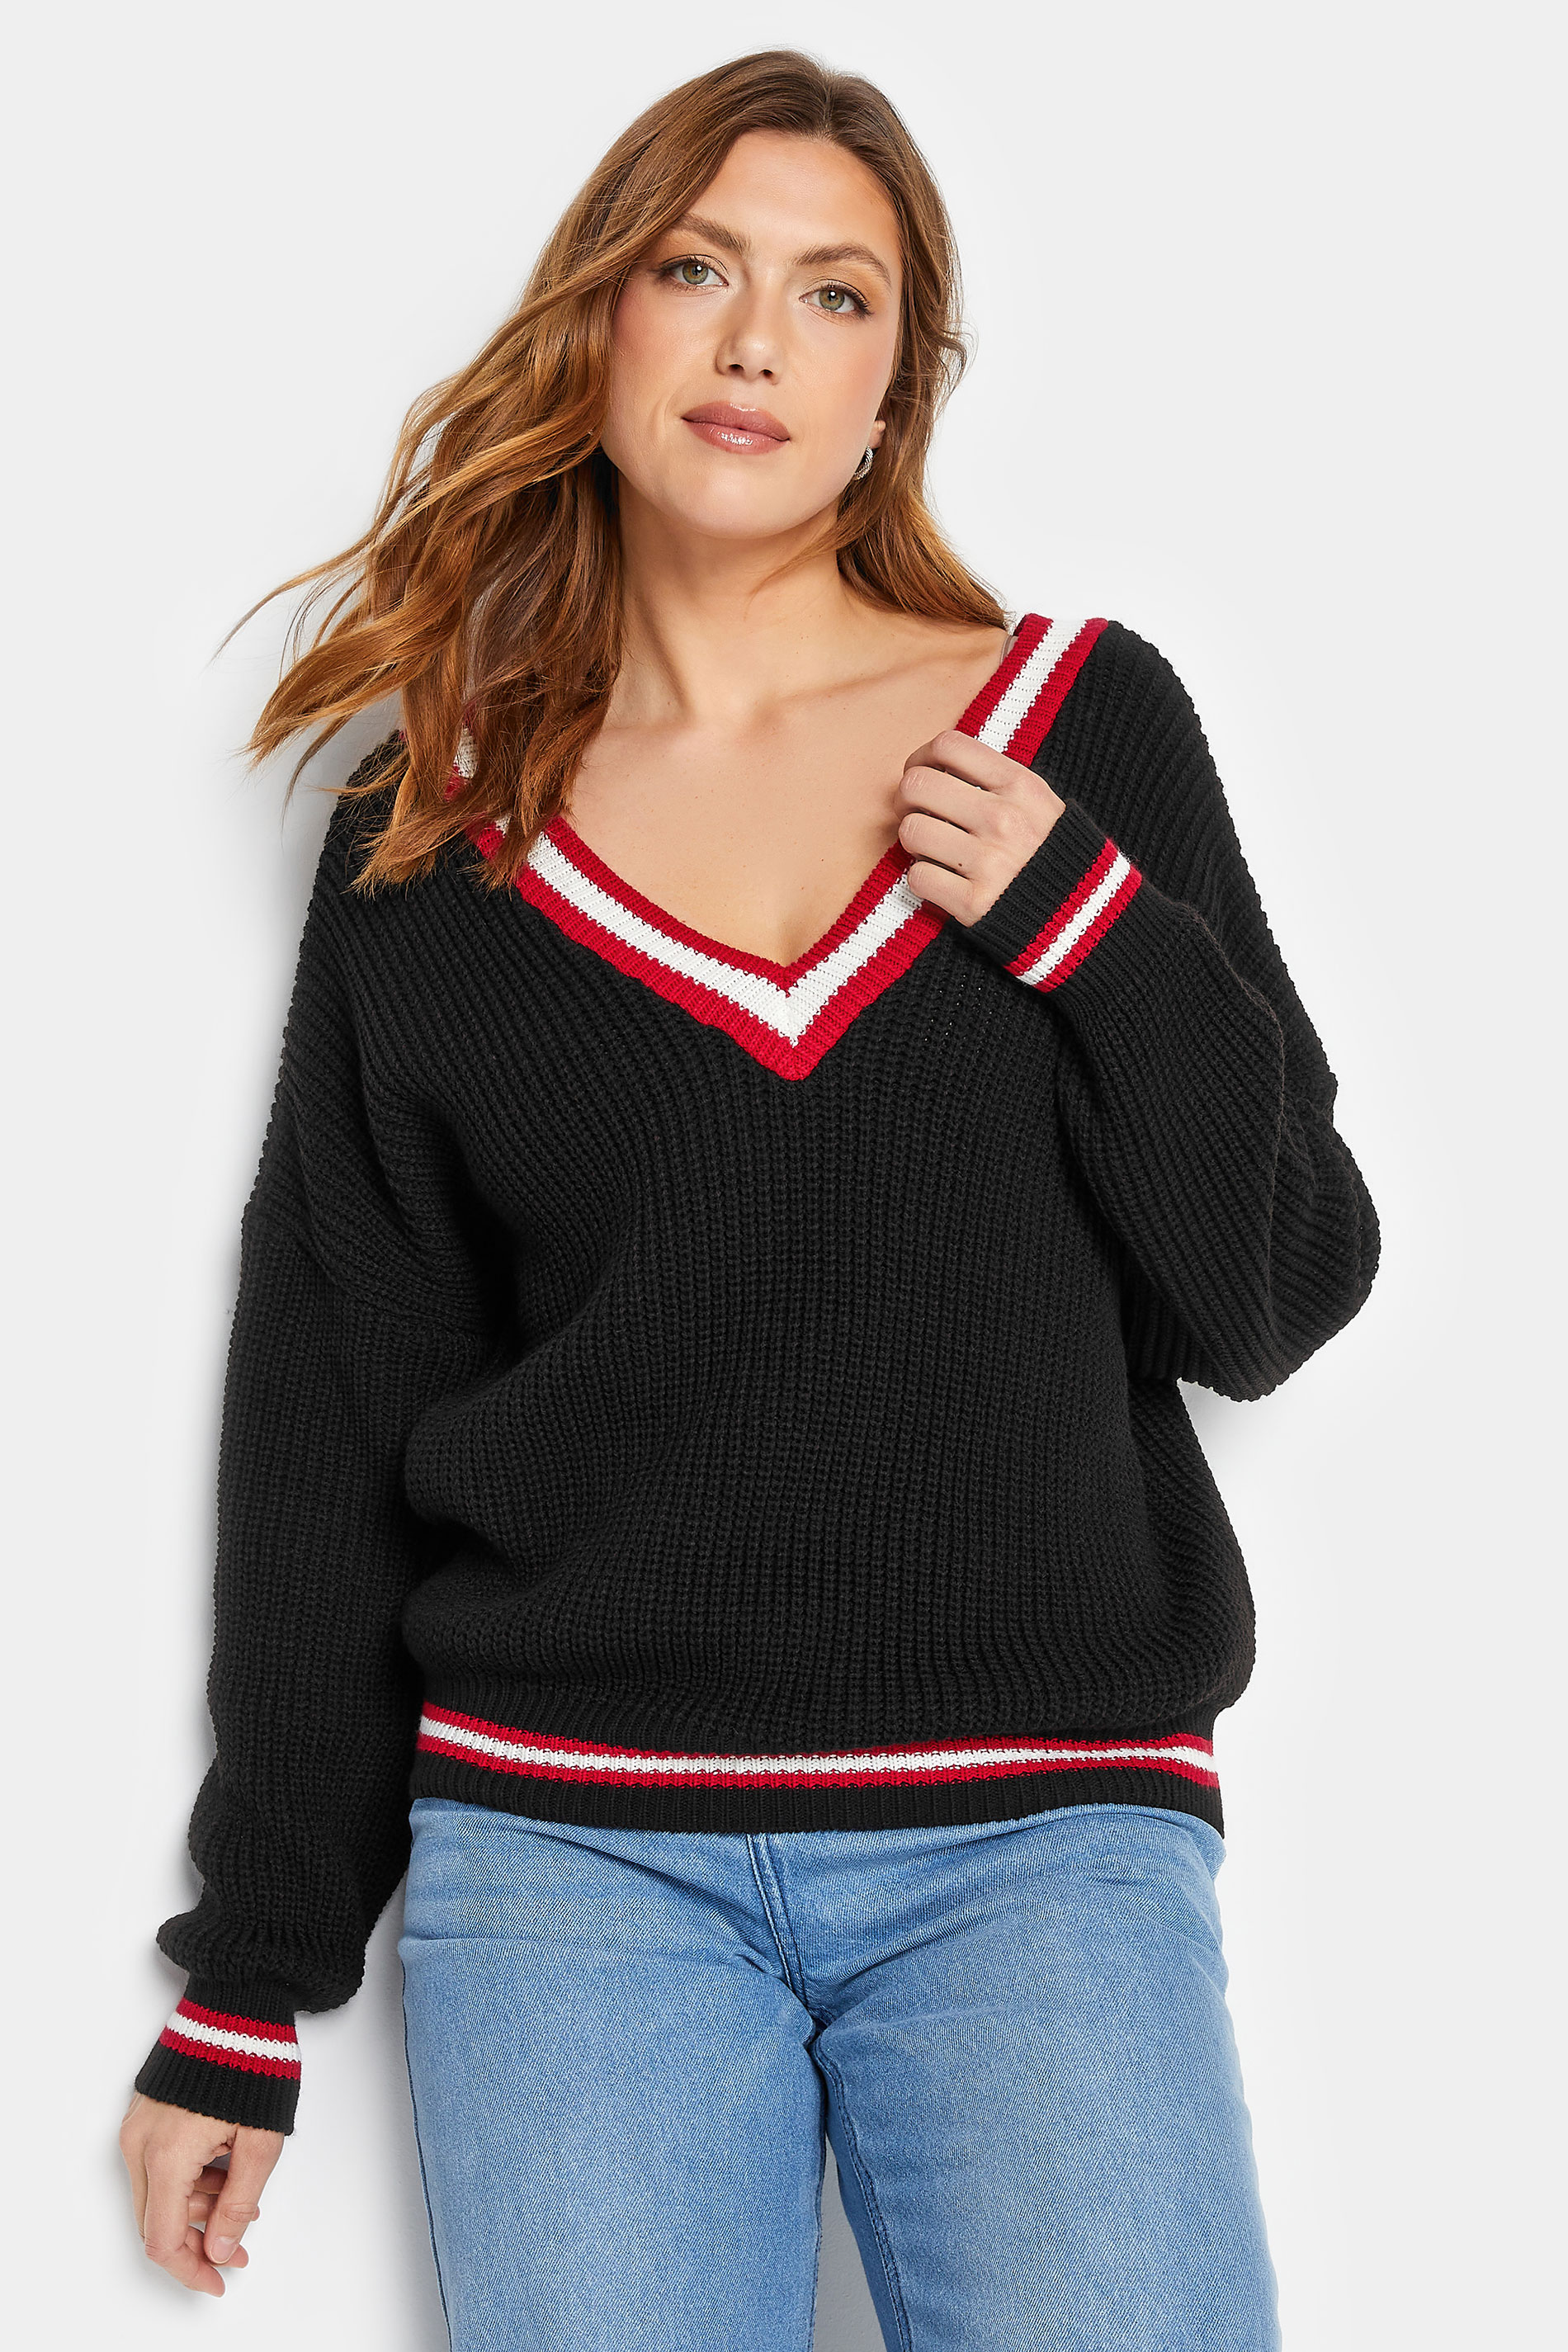 LTS Tall Women's Black & Red V-Neck Knitted Jumper | Long Tall Sally 1